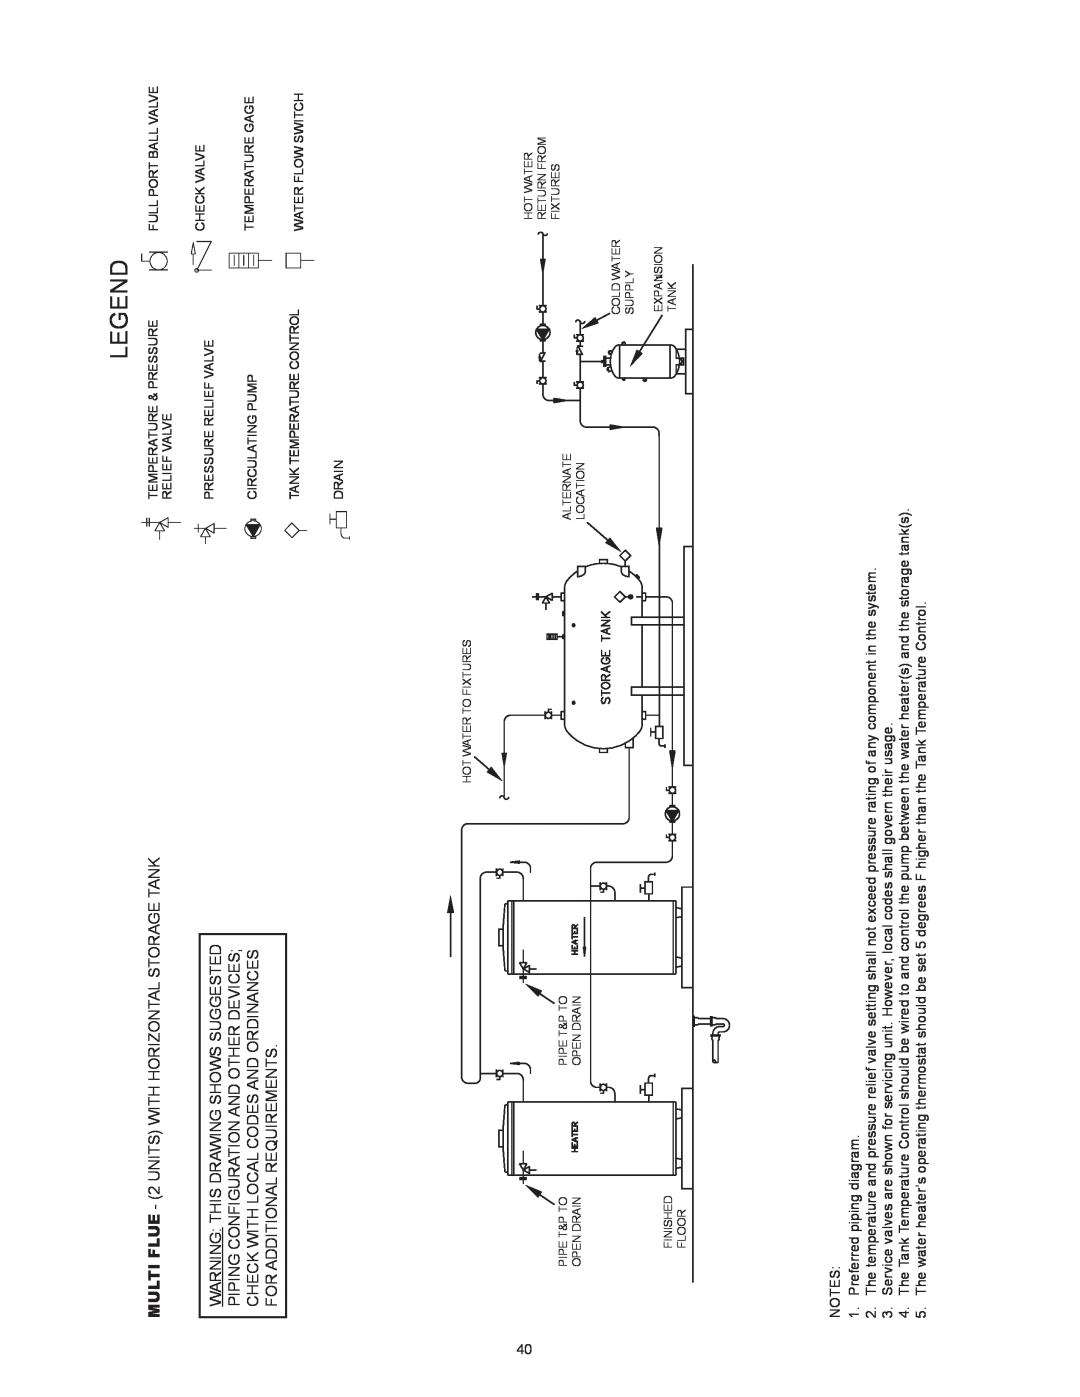 State Industries SBD85500NE MULTI FLUE - 2 UNITS WITH HORIZONTAL STORAGE TANK, Warning This Drawing Shows Suggested 